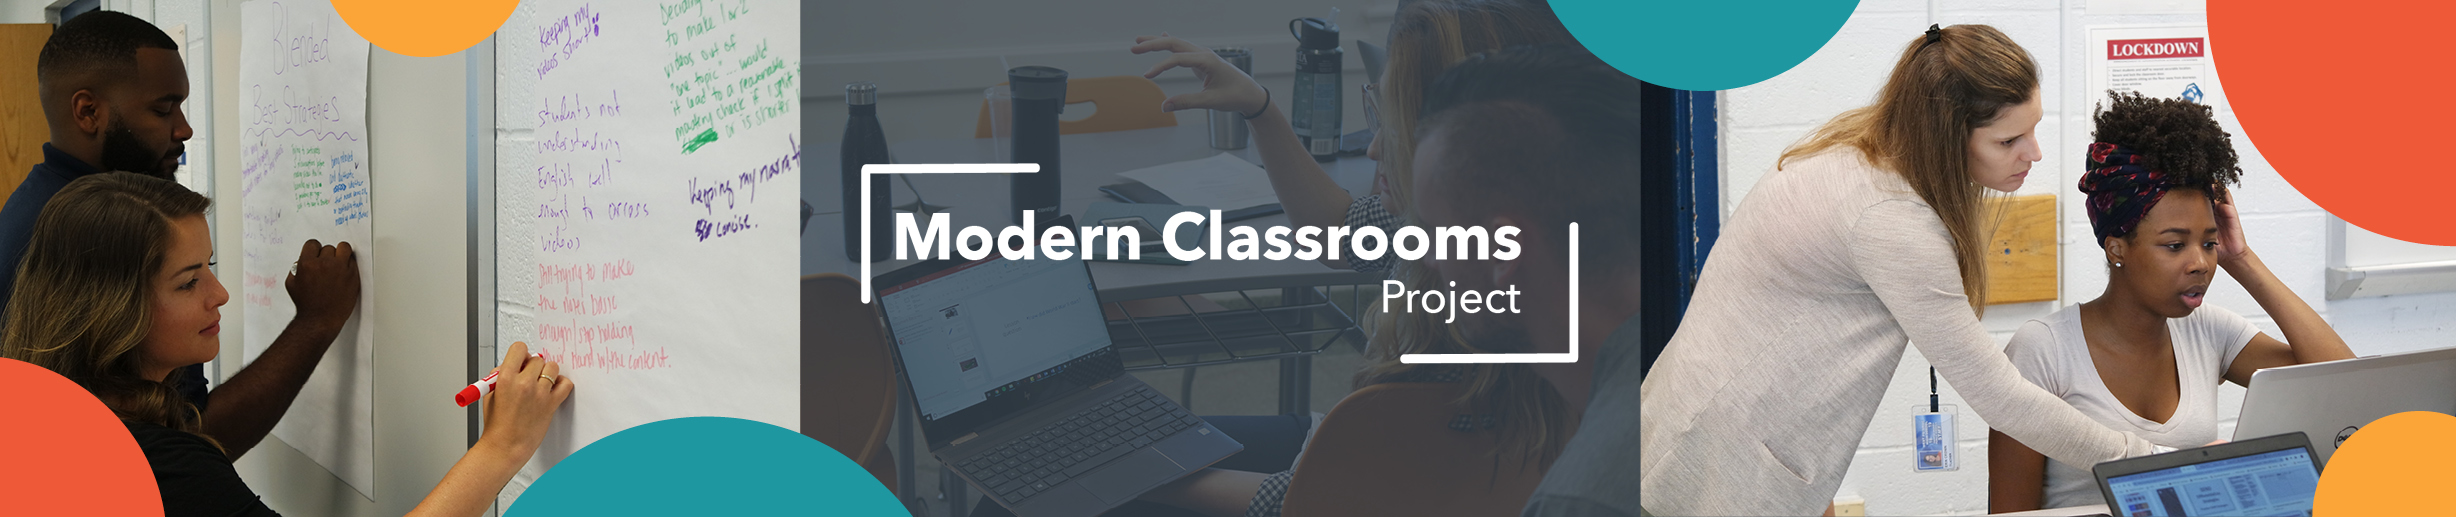 Modern Classrooms Project